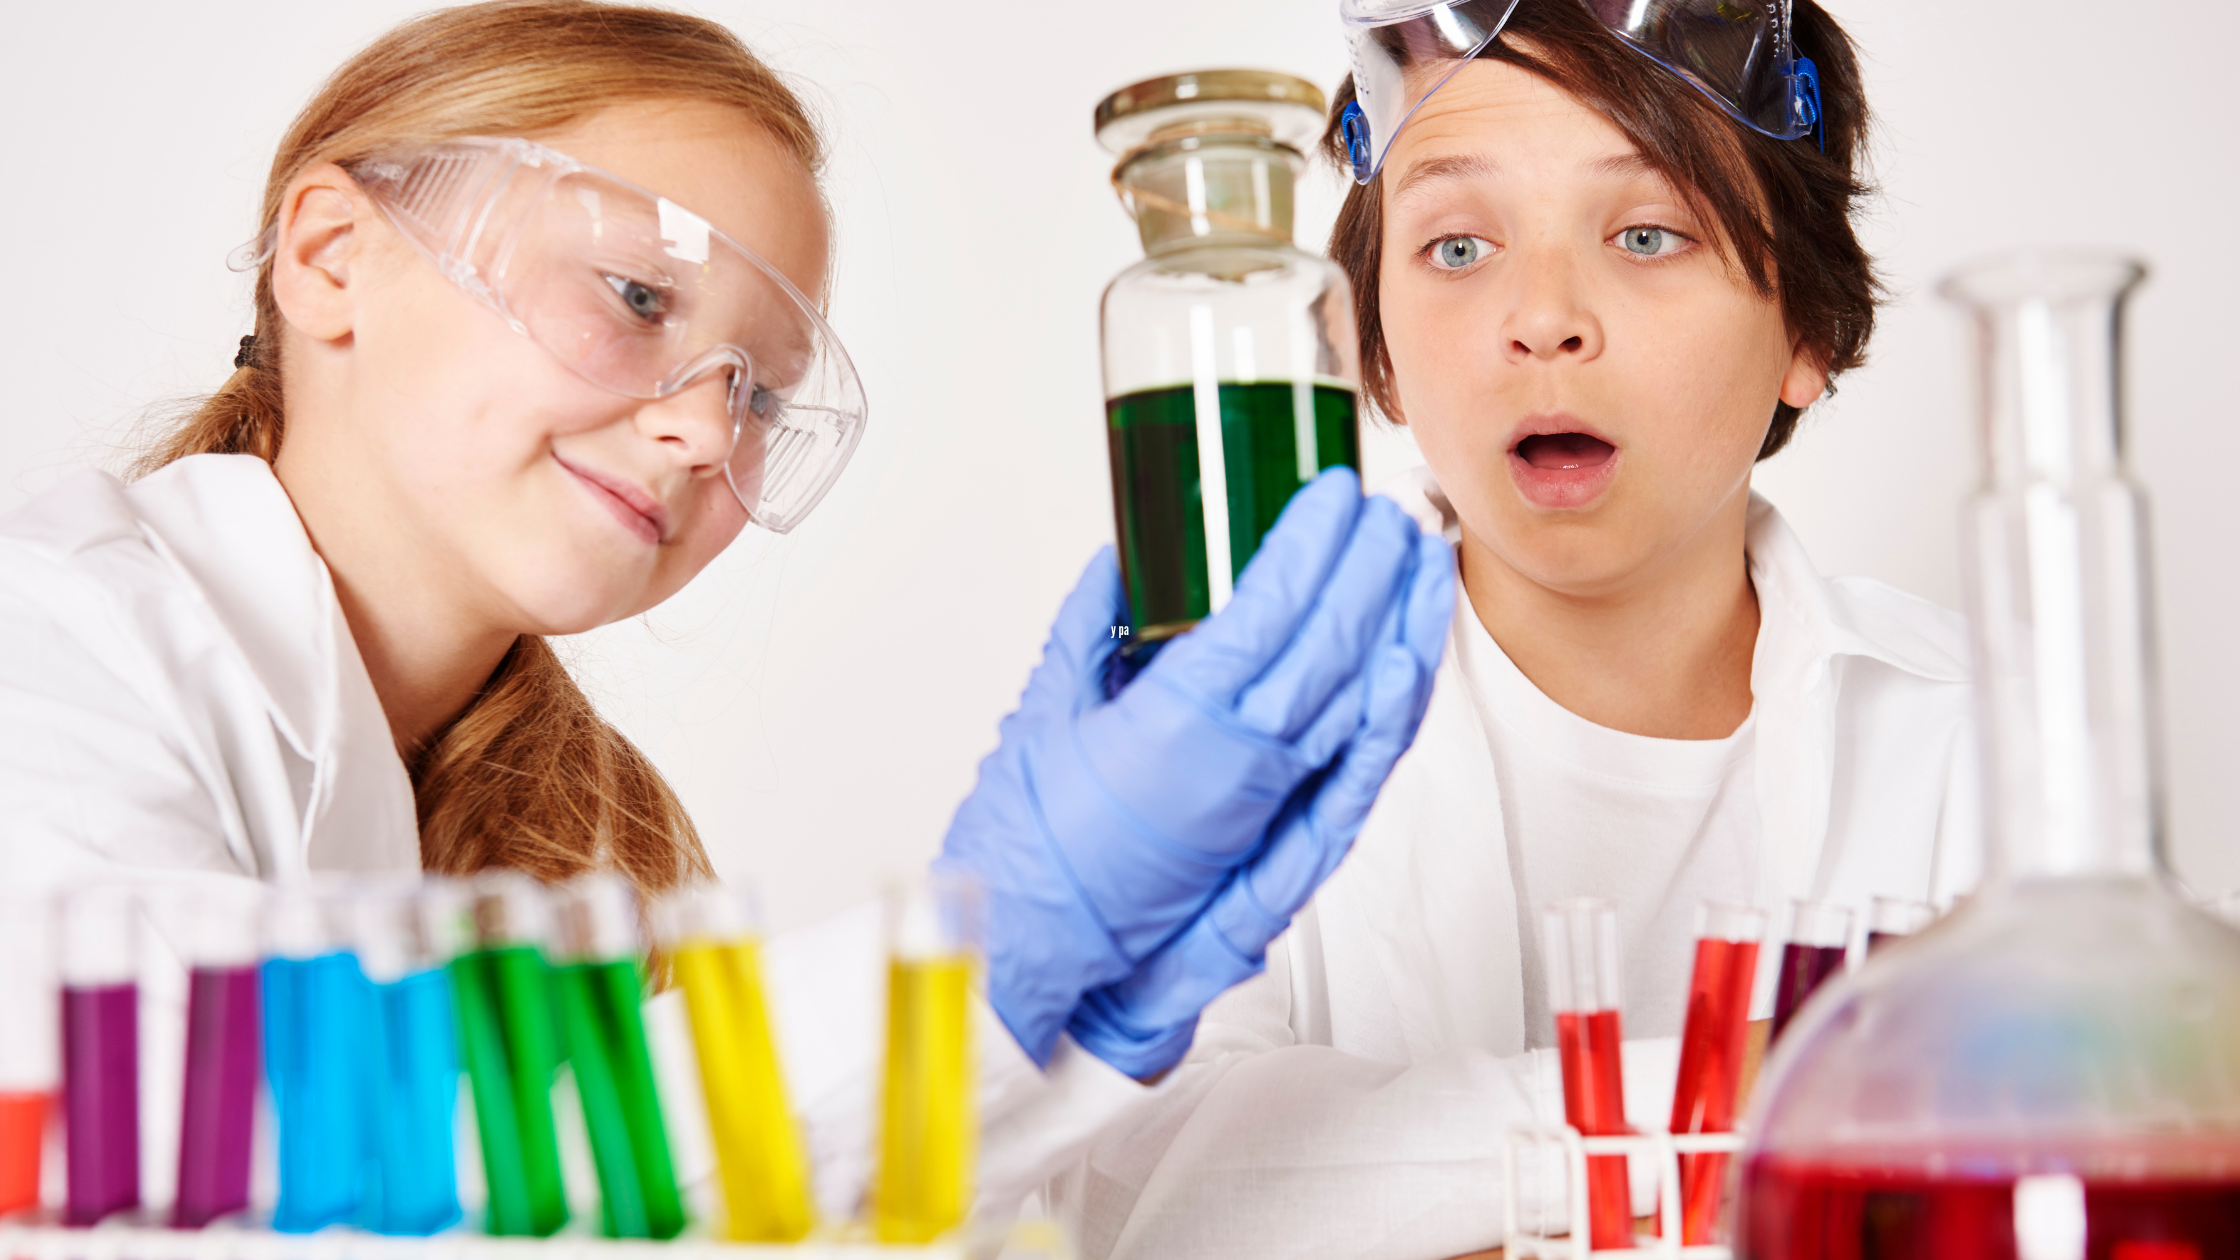 5 Fun & Cool Science Activities with Dye to Do With the Kids 2